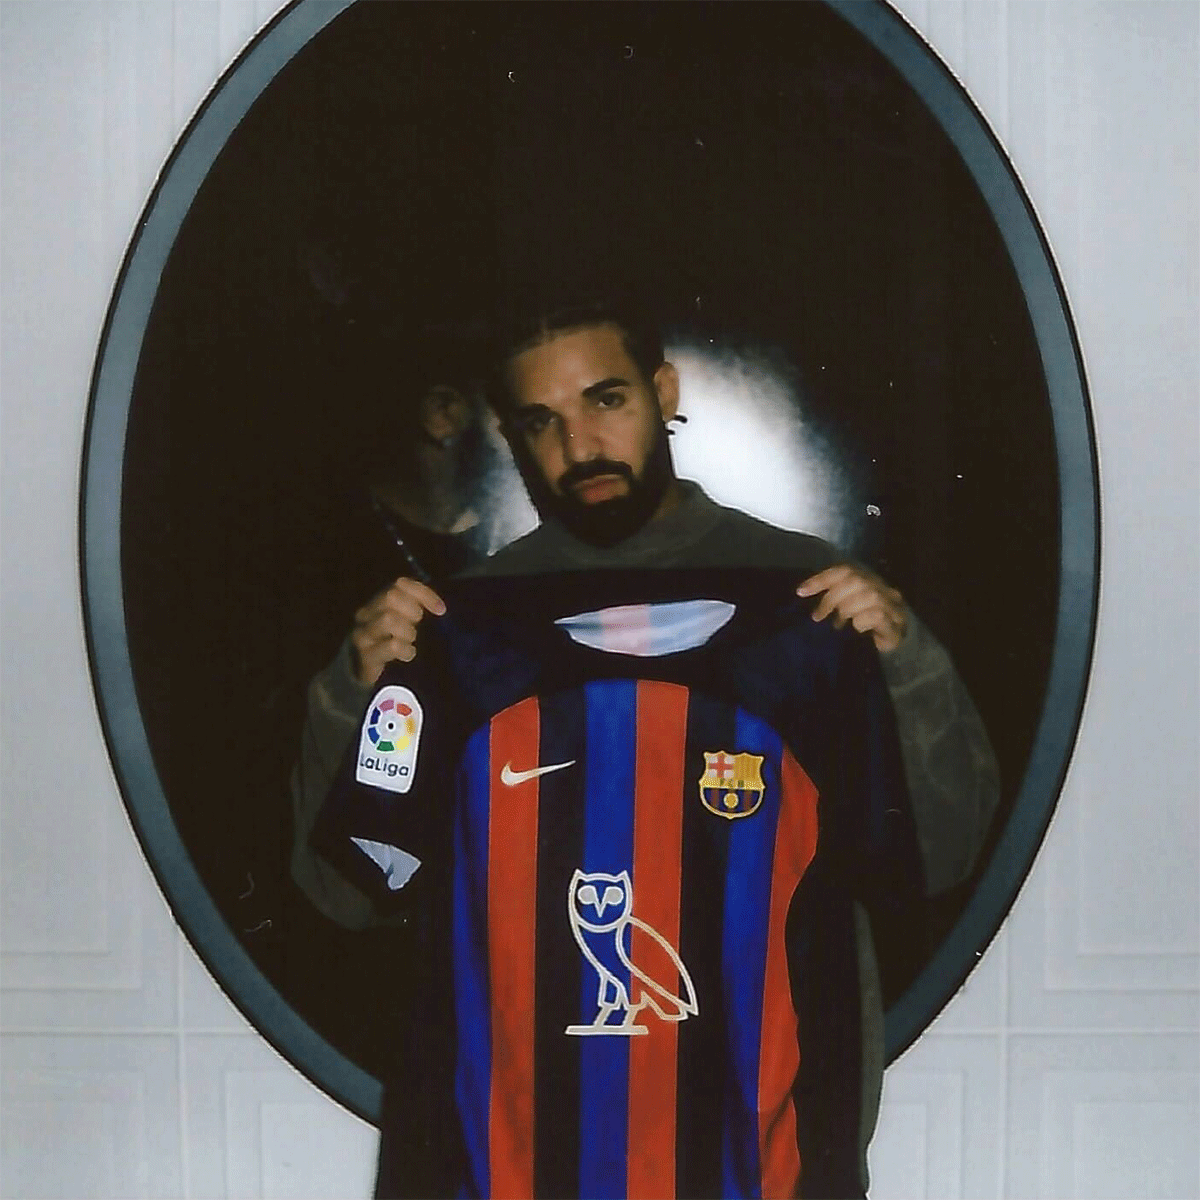 Four-times Grammy award winner Drake posted an image of the limited-edition jersey on Instagram to his more than 120 million followers.